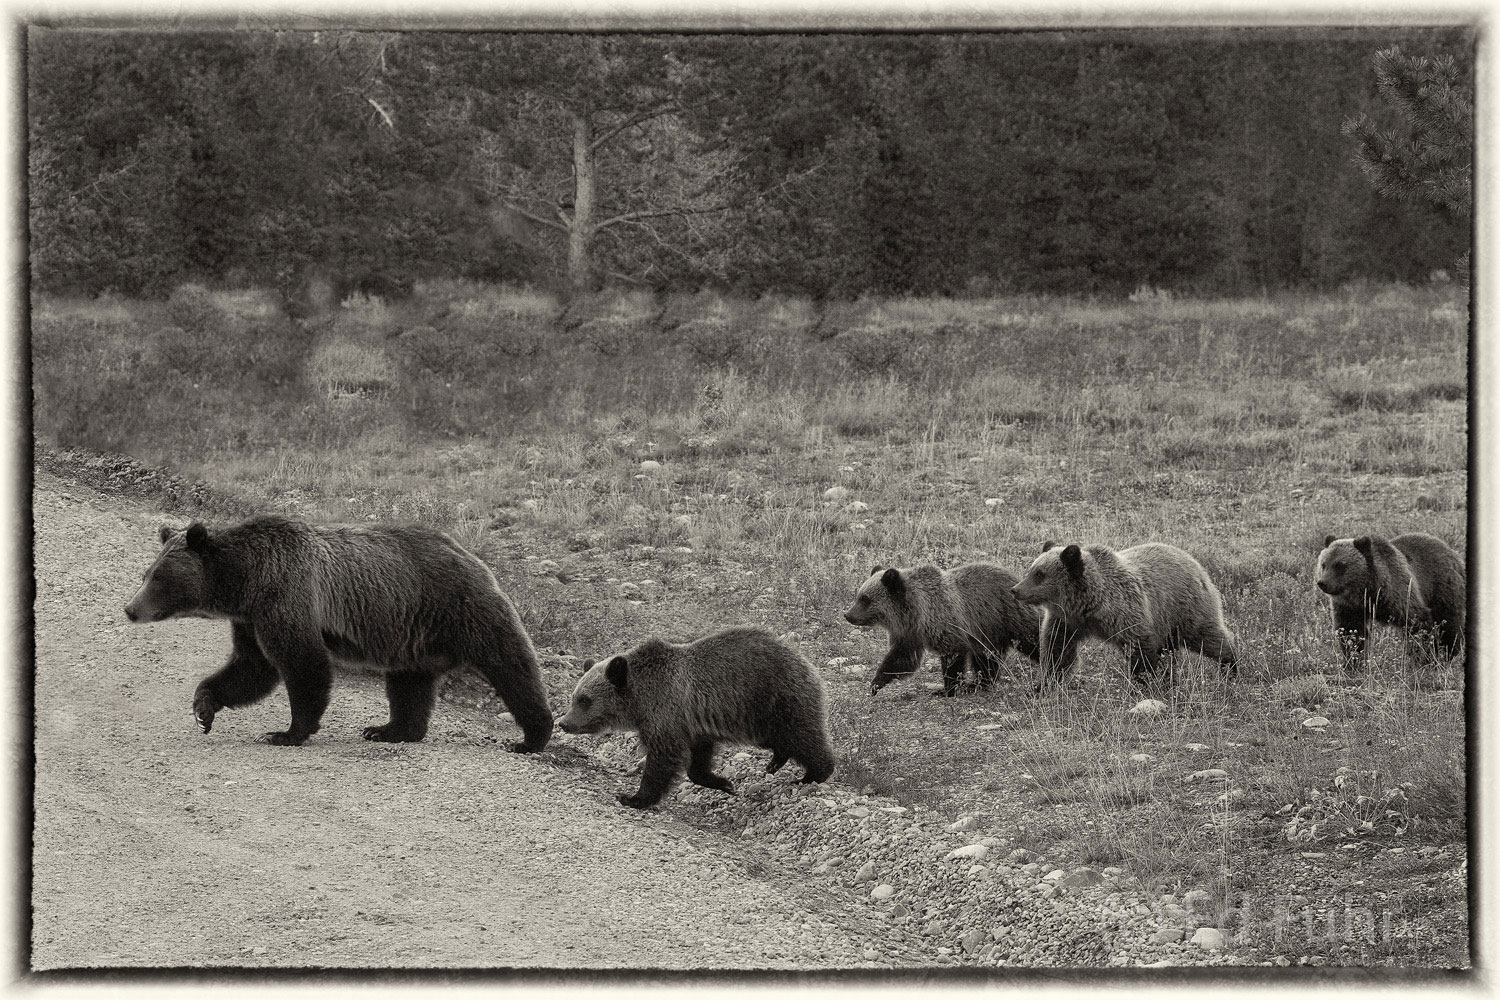 Grizzly 399 and her four cubs cross Pilgrim road.